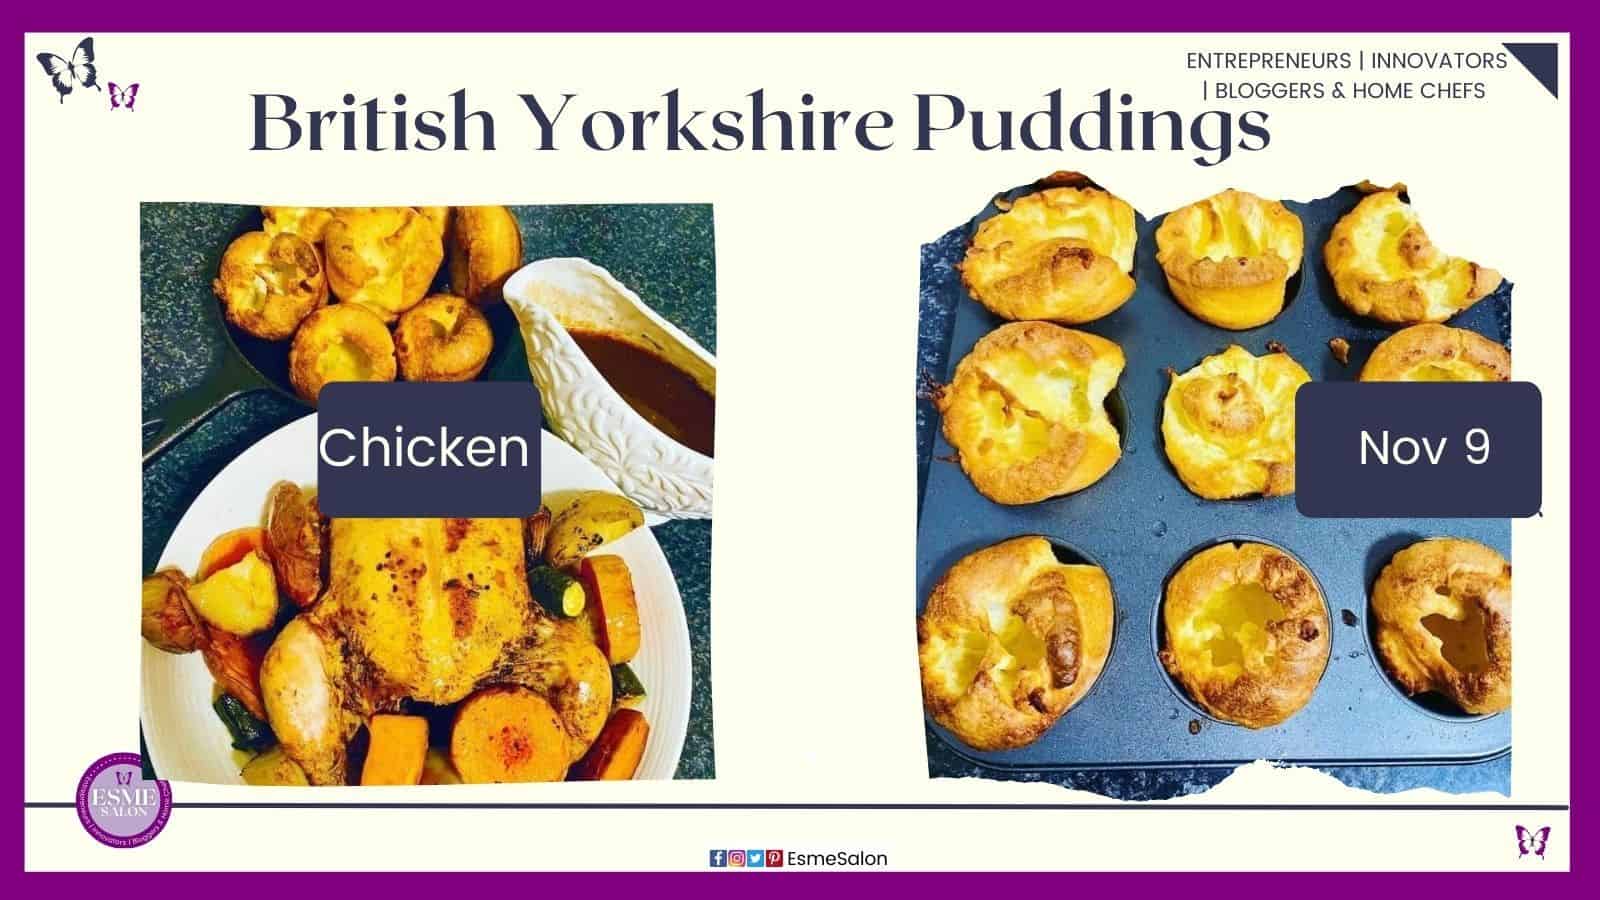 an image of a batch of British Yorkshire Puddings in a baking pan as well as plated with a roasted chicken